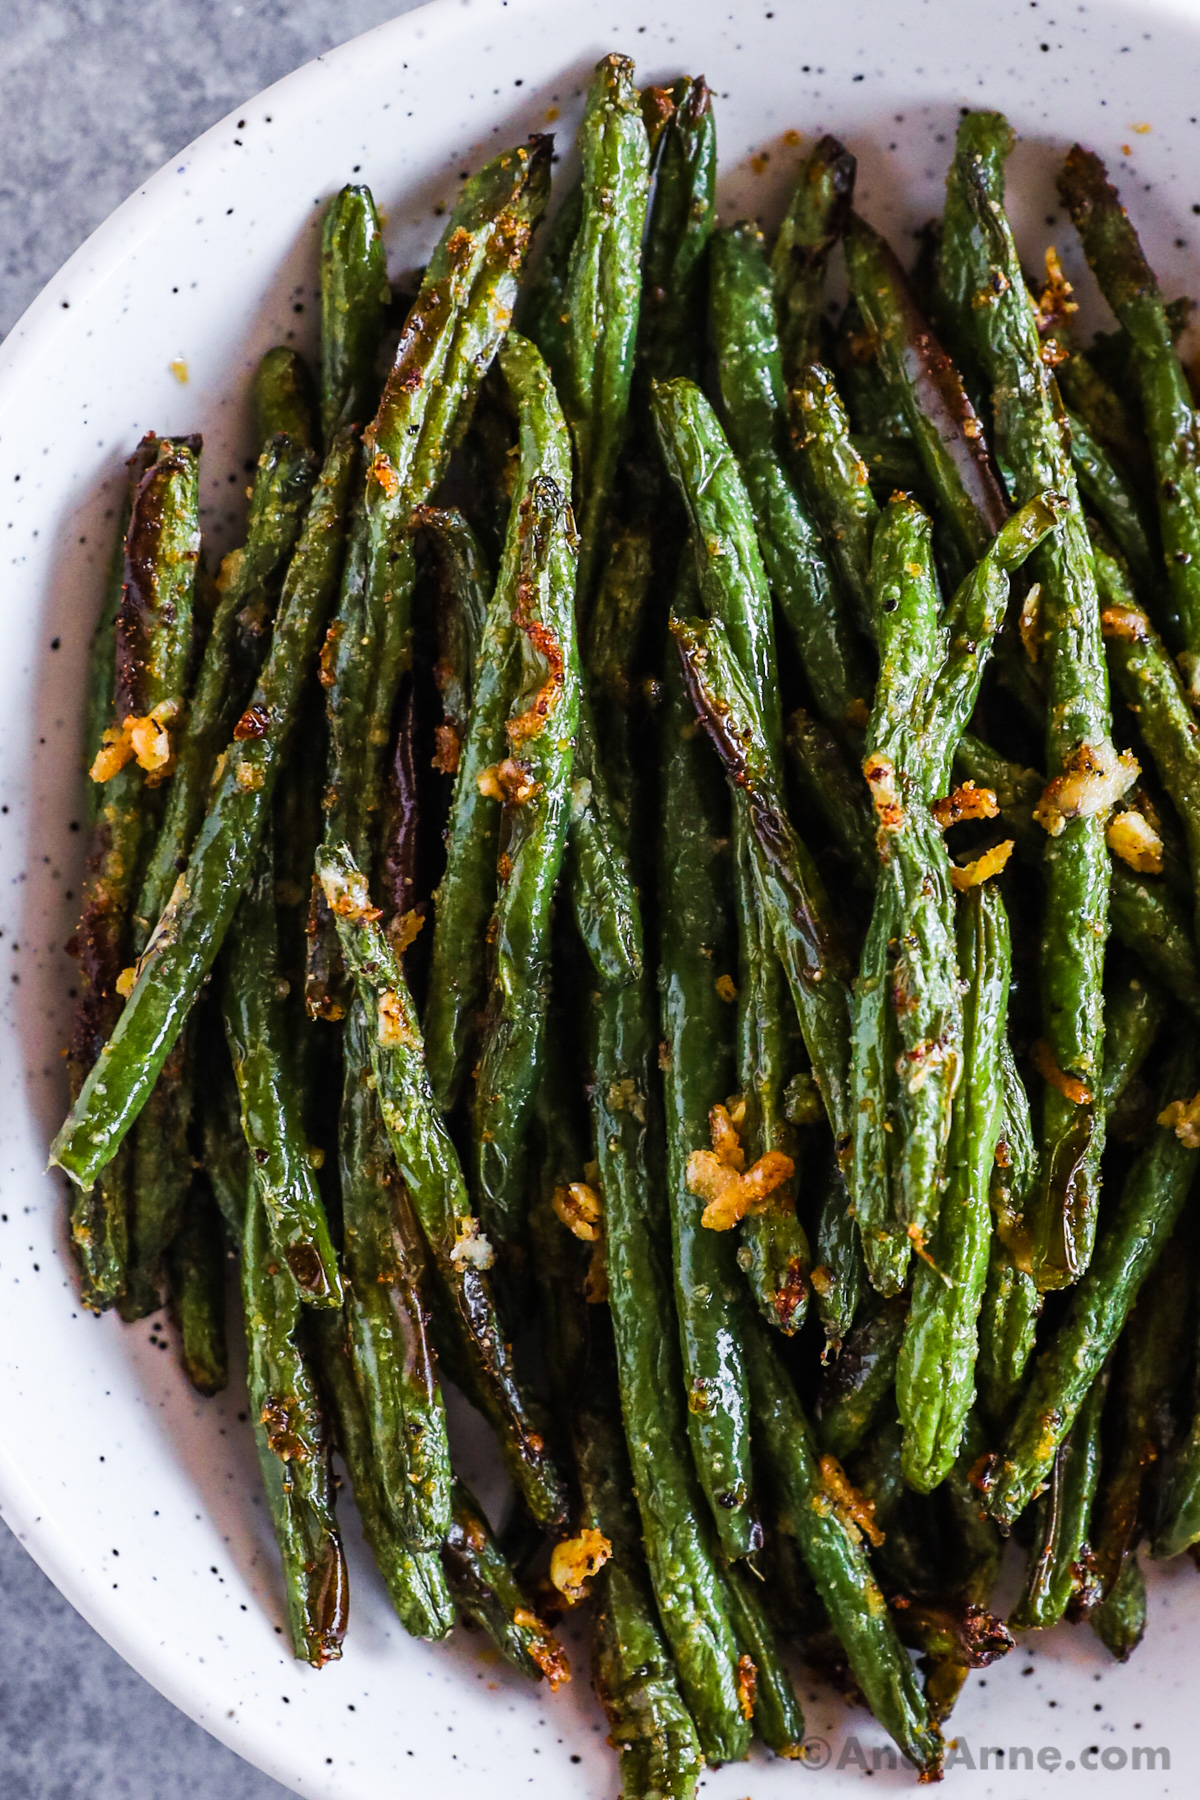 Bowl of crispy green beans with pieces of crispy parmesan cheese pieces.